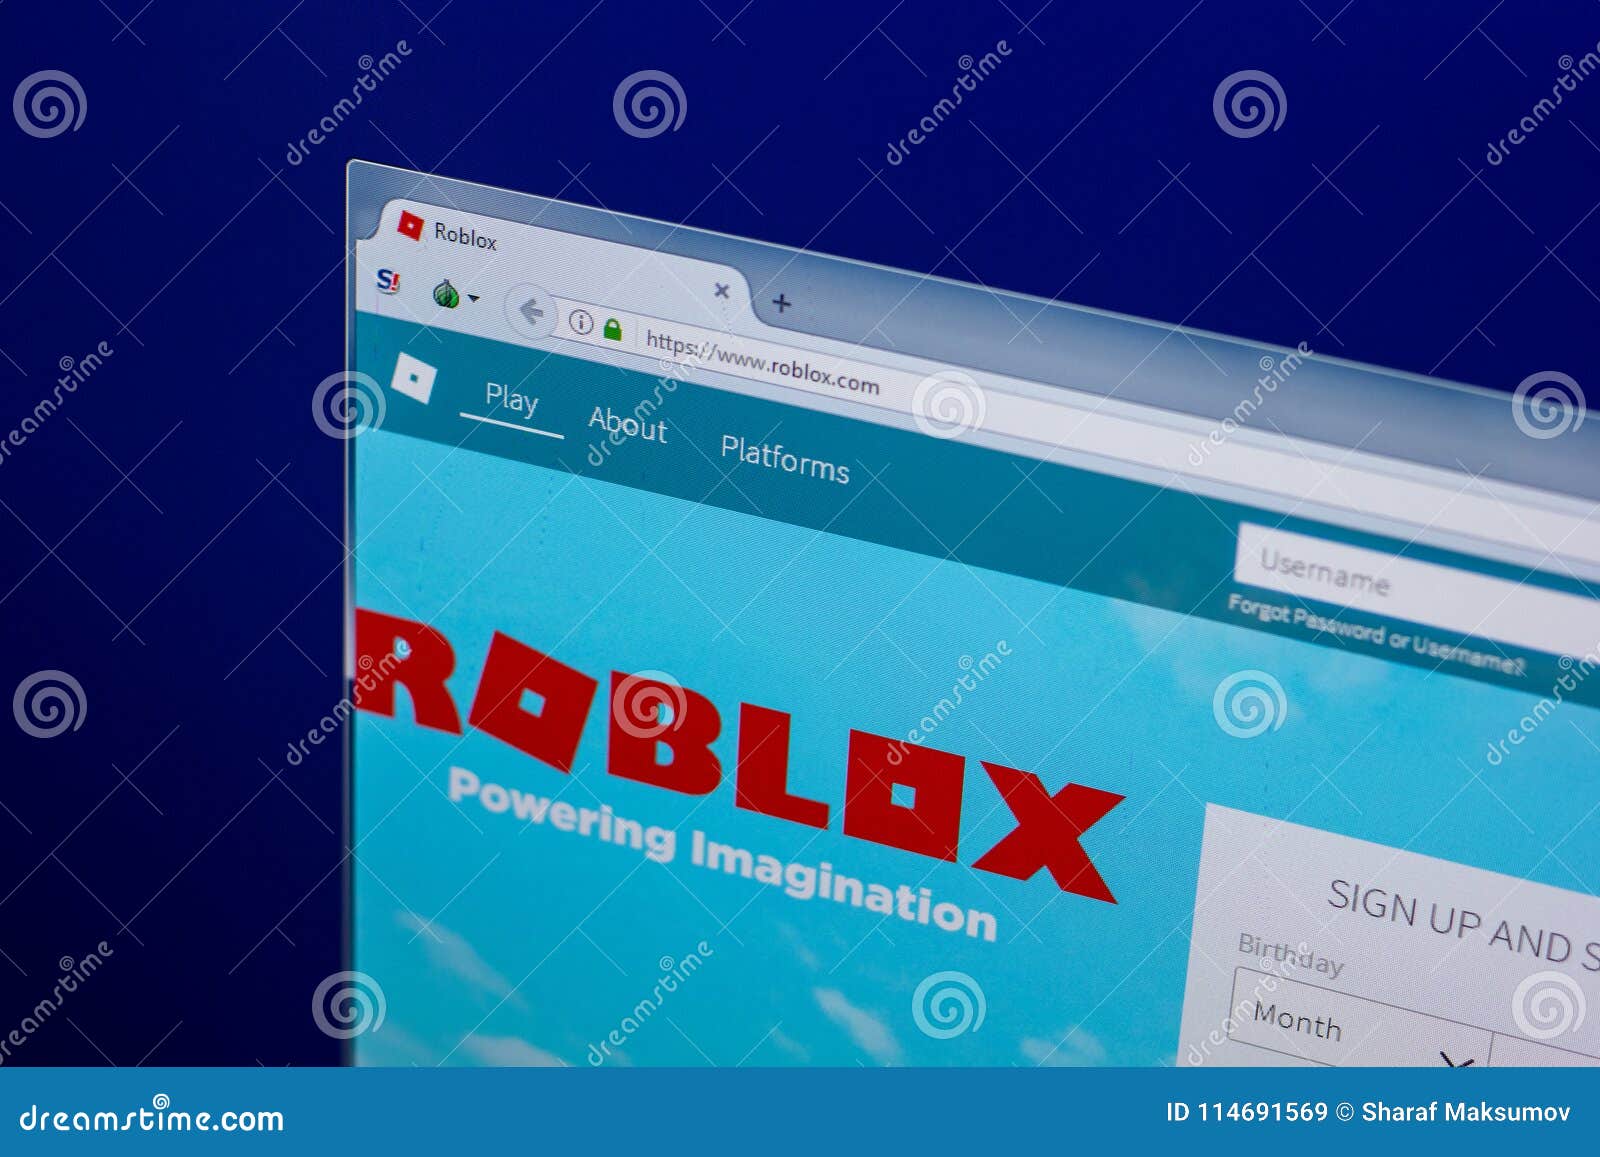 19 Roblox Website Photos Free Royalty Free Stock Photos From